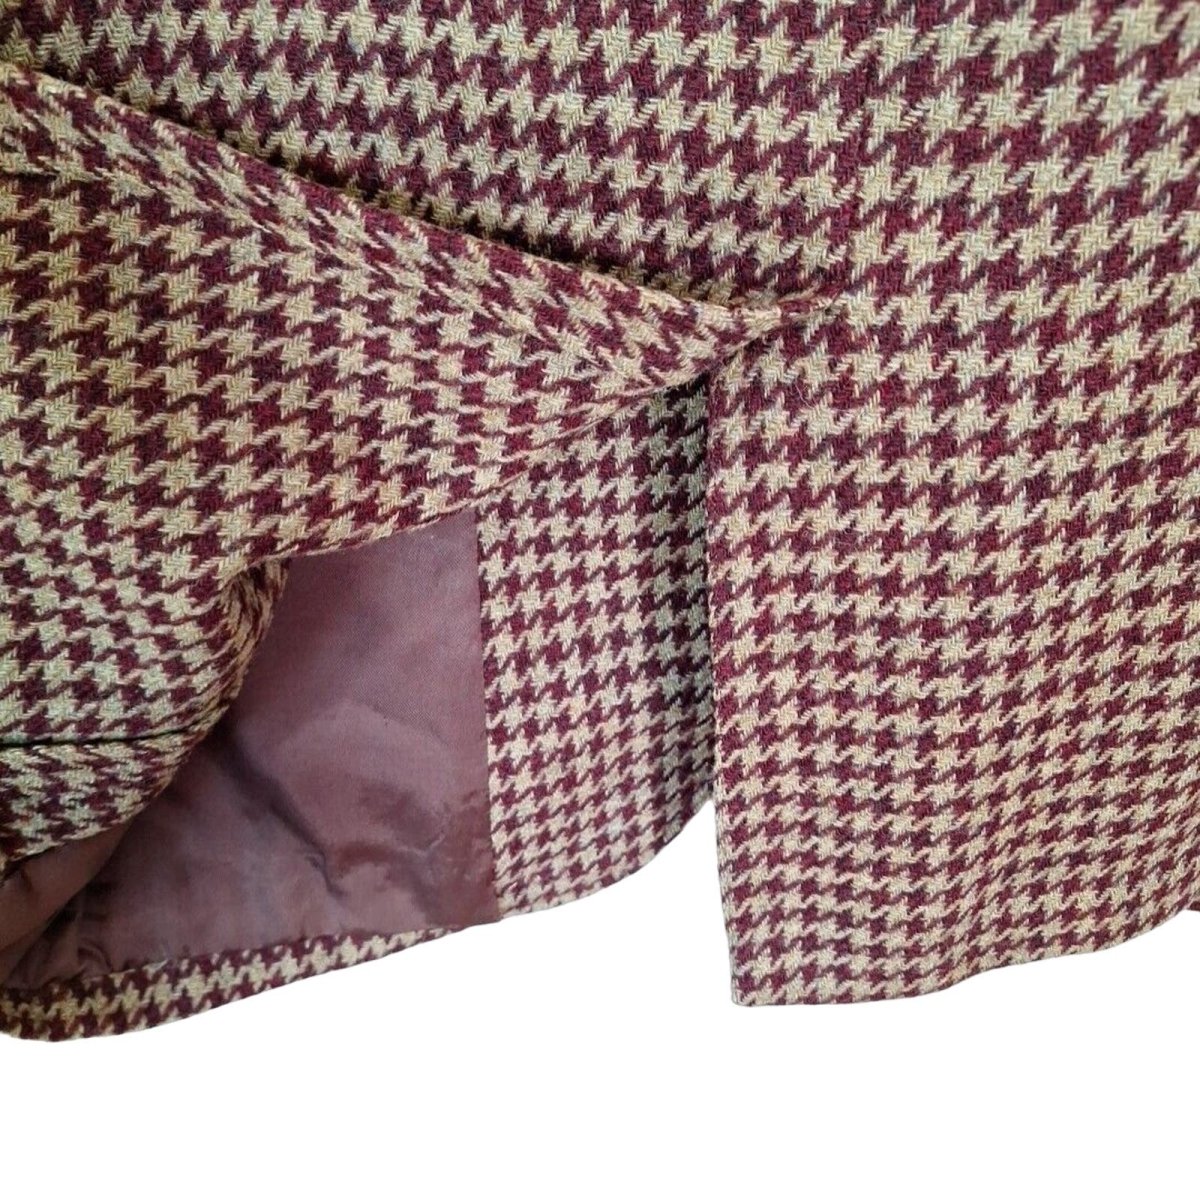 RARE Vintage 1960s Brooks Brothers Oxblood Houndstooth Check Sport Coat Men Size 38R - themallvintage The Mall Vintage